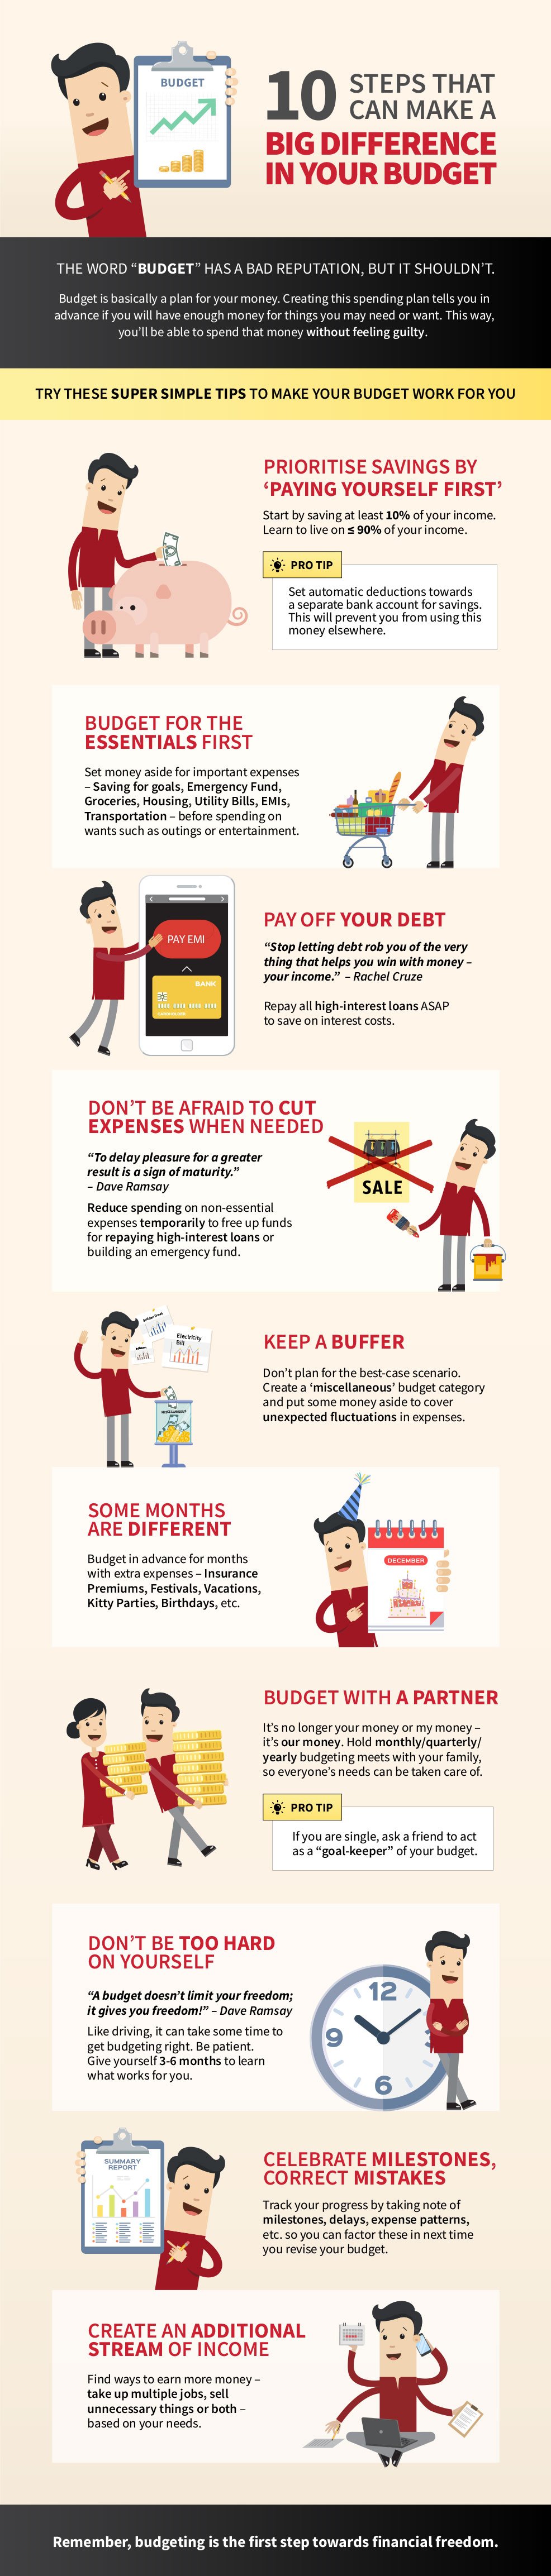 10 steps that can make a big difference in your budget